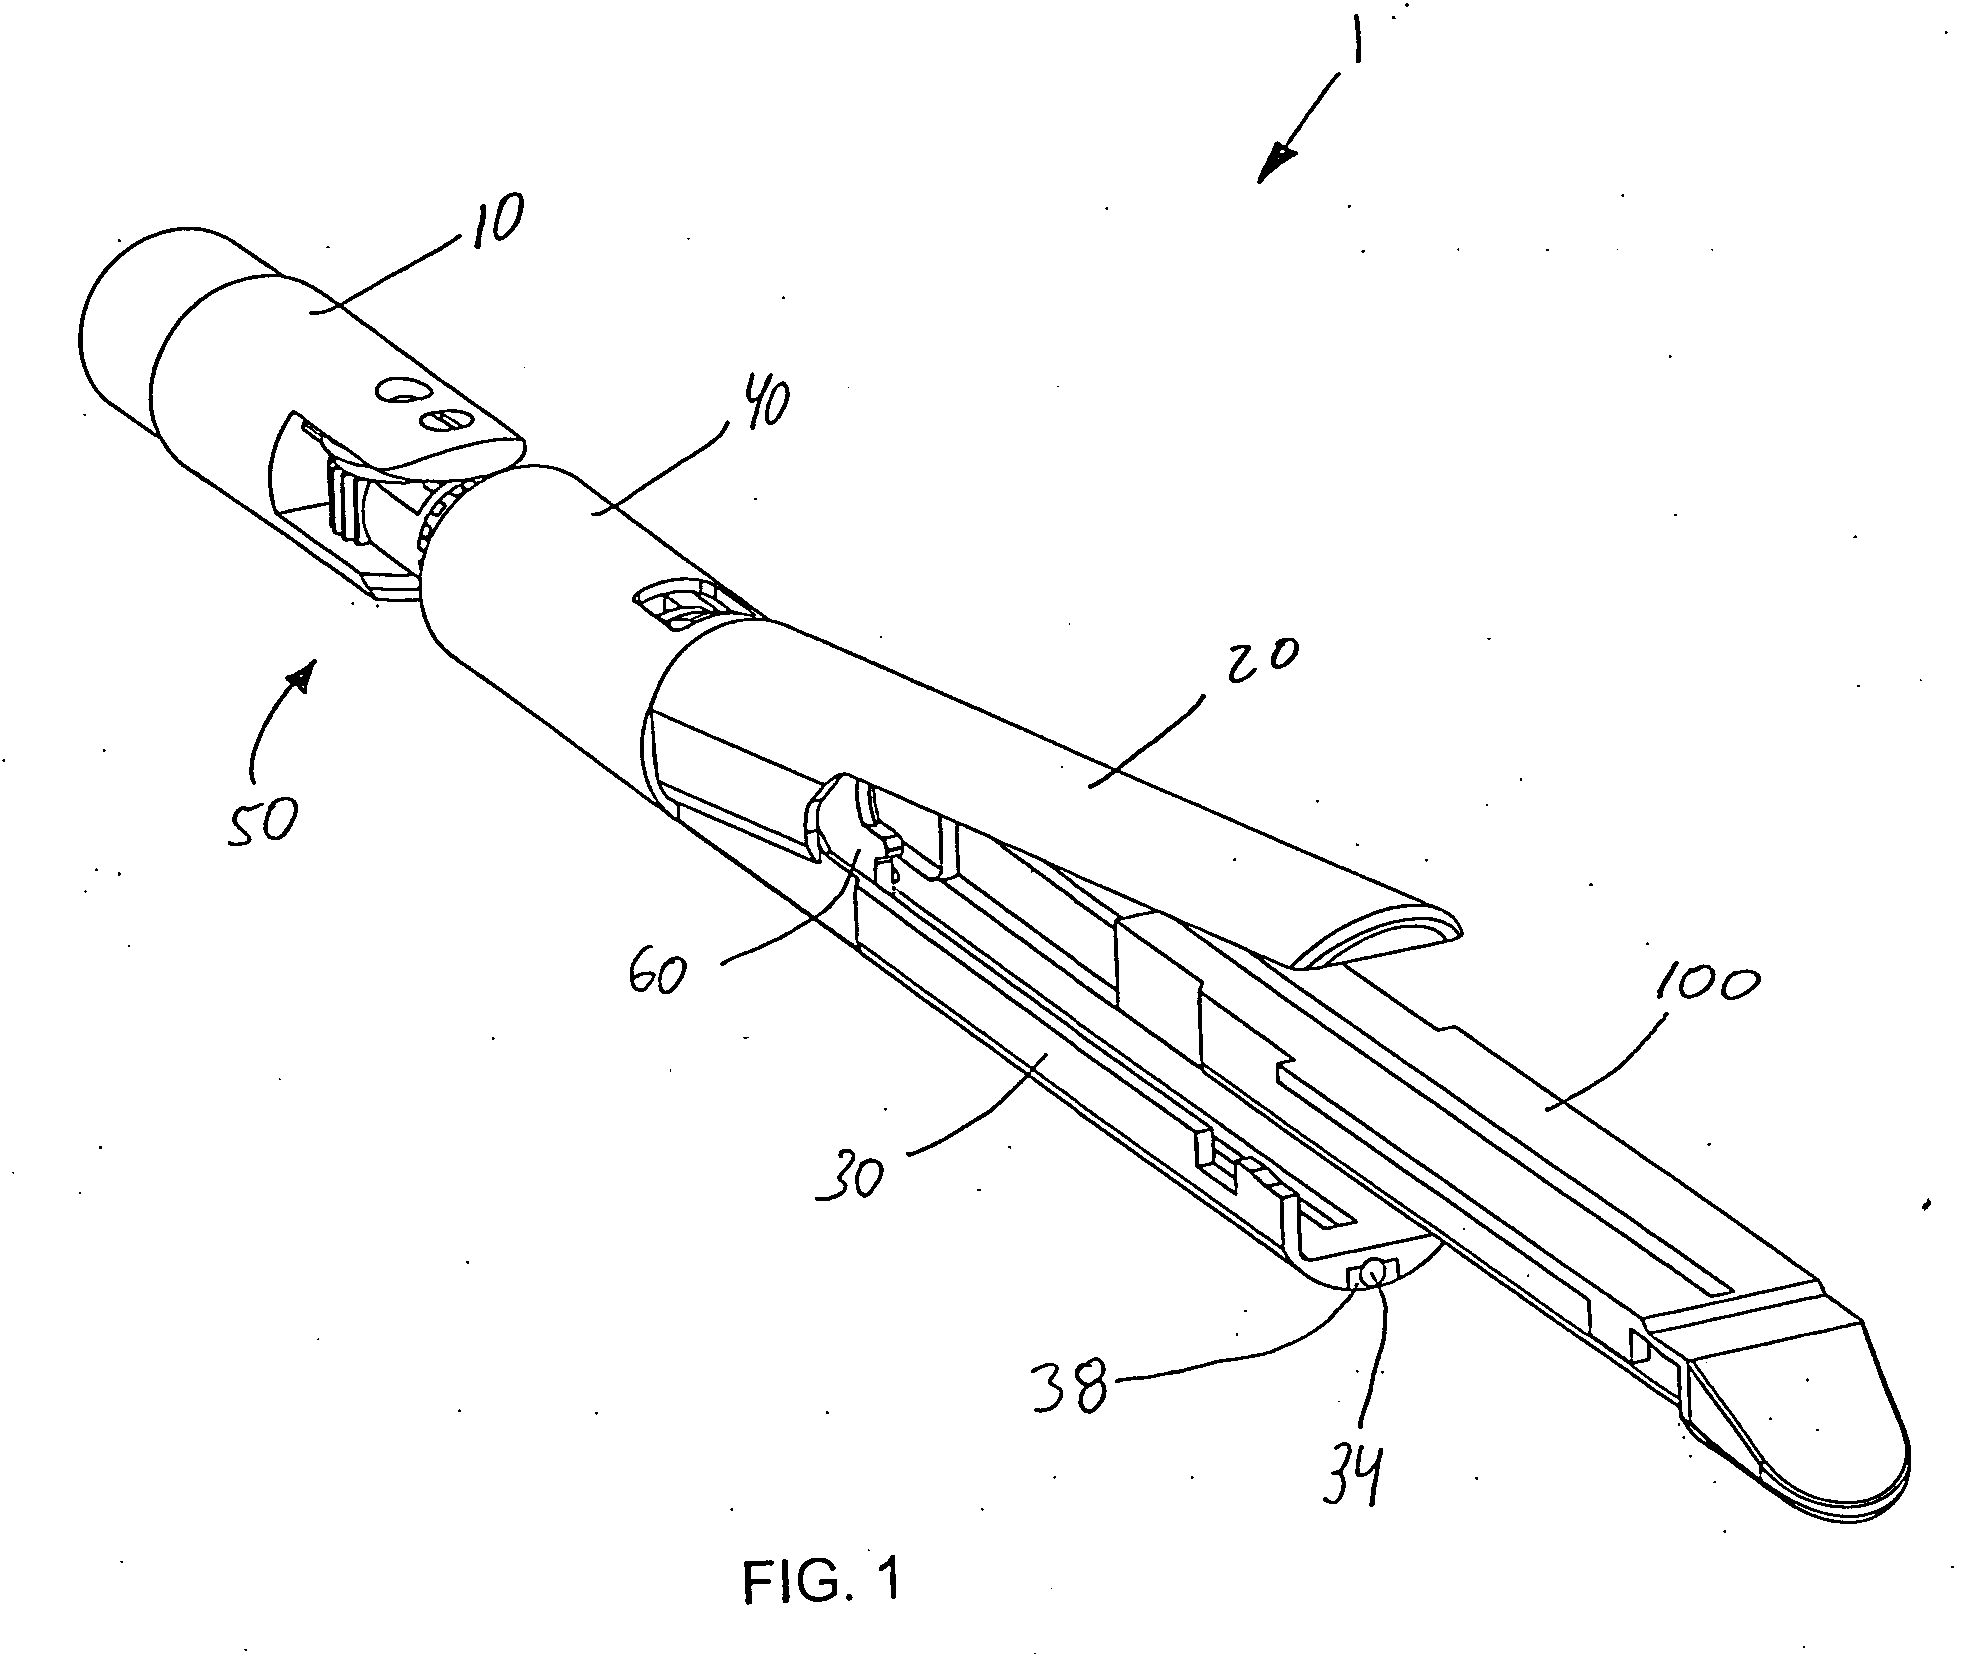 Method for operating a surgical stapling and cutting device